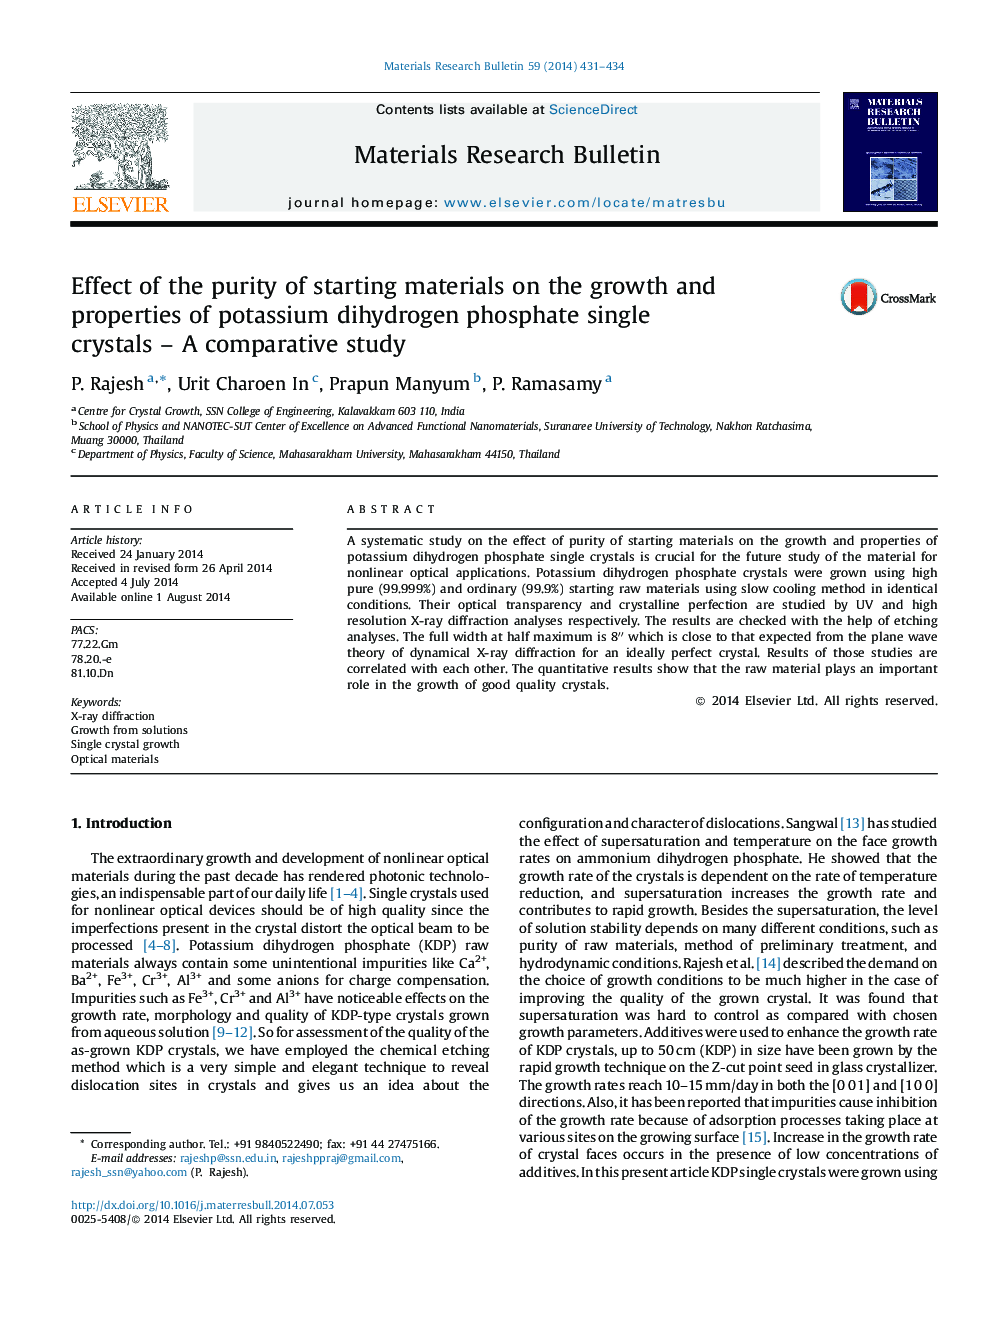 Effect of the purity of starting materials on the growth and properties of potassium dihydrogen phosphate single crystals – A comparative study